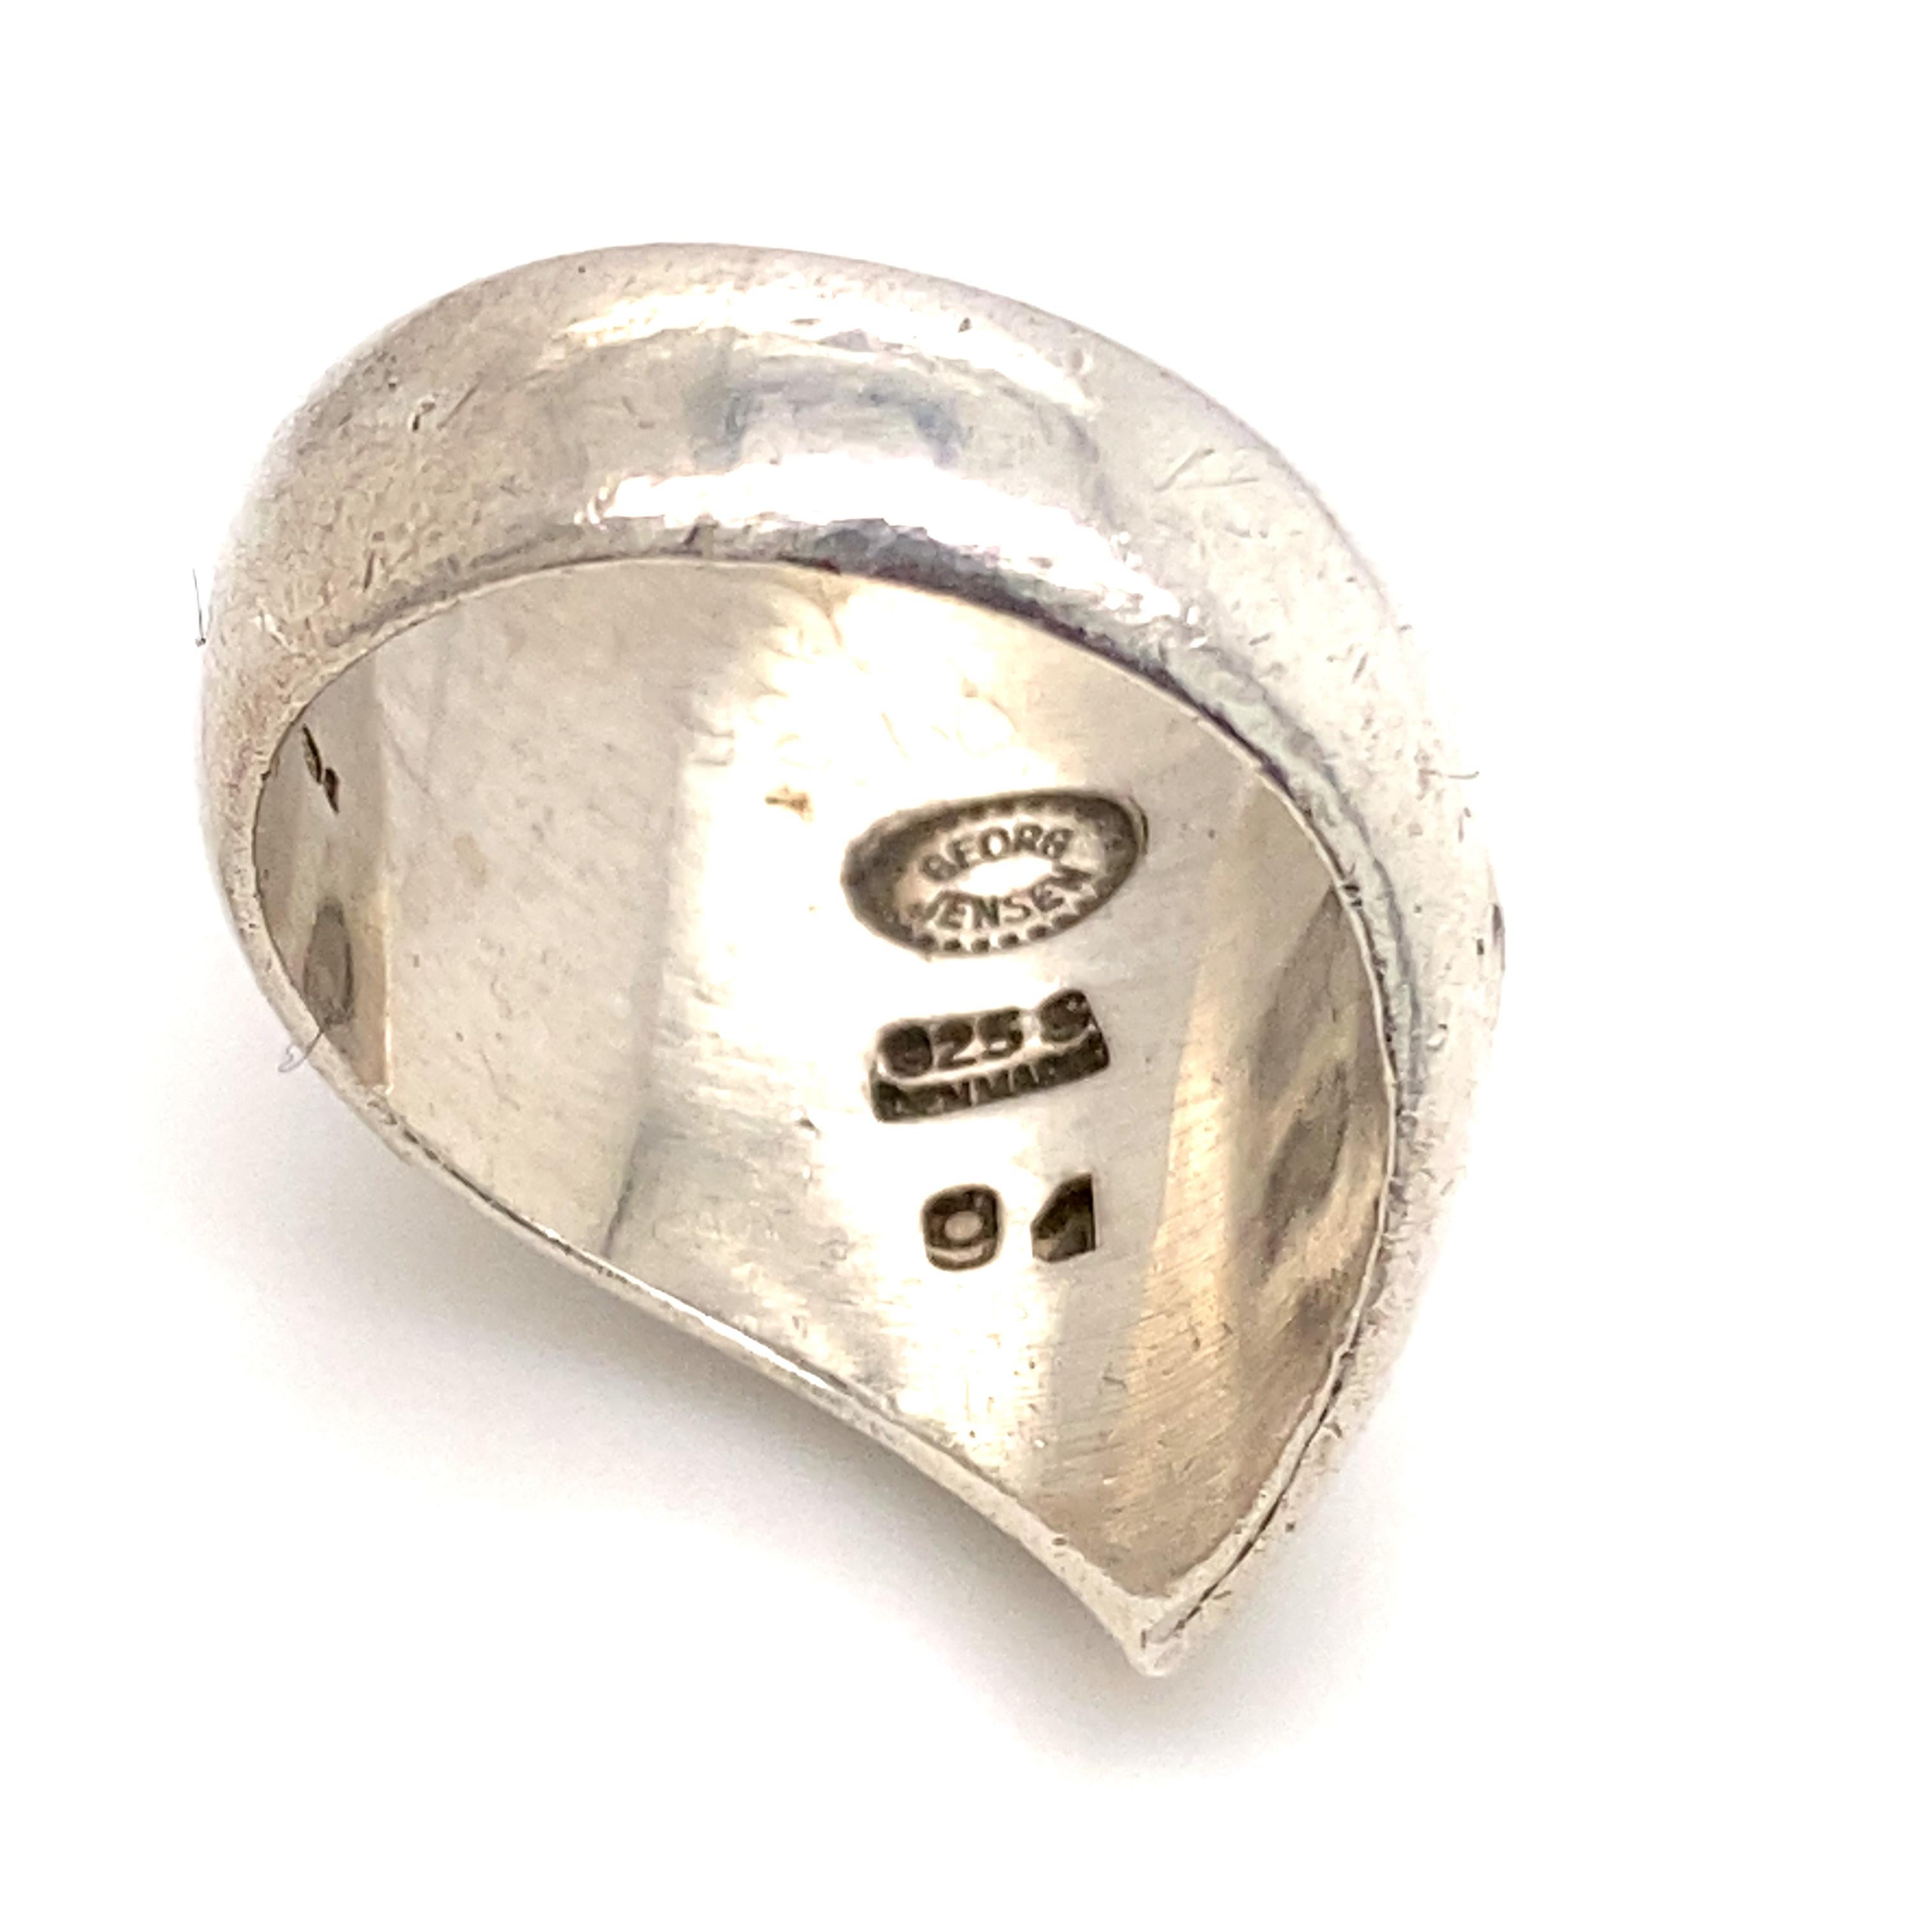 A Nanna Ditzel for Georg Jensen silver ring, Denmark circa 1968

Designed as an elegant curved and undulating silver sculptural form, this ring sits beautifully on the finger, catching the light when viewed from different angles.

Nanna Ditzel (1923